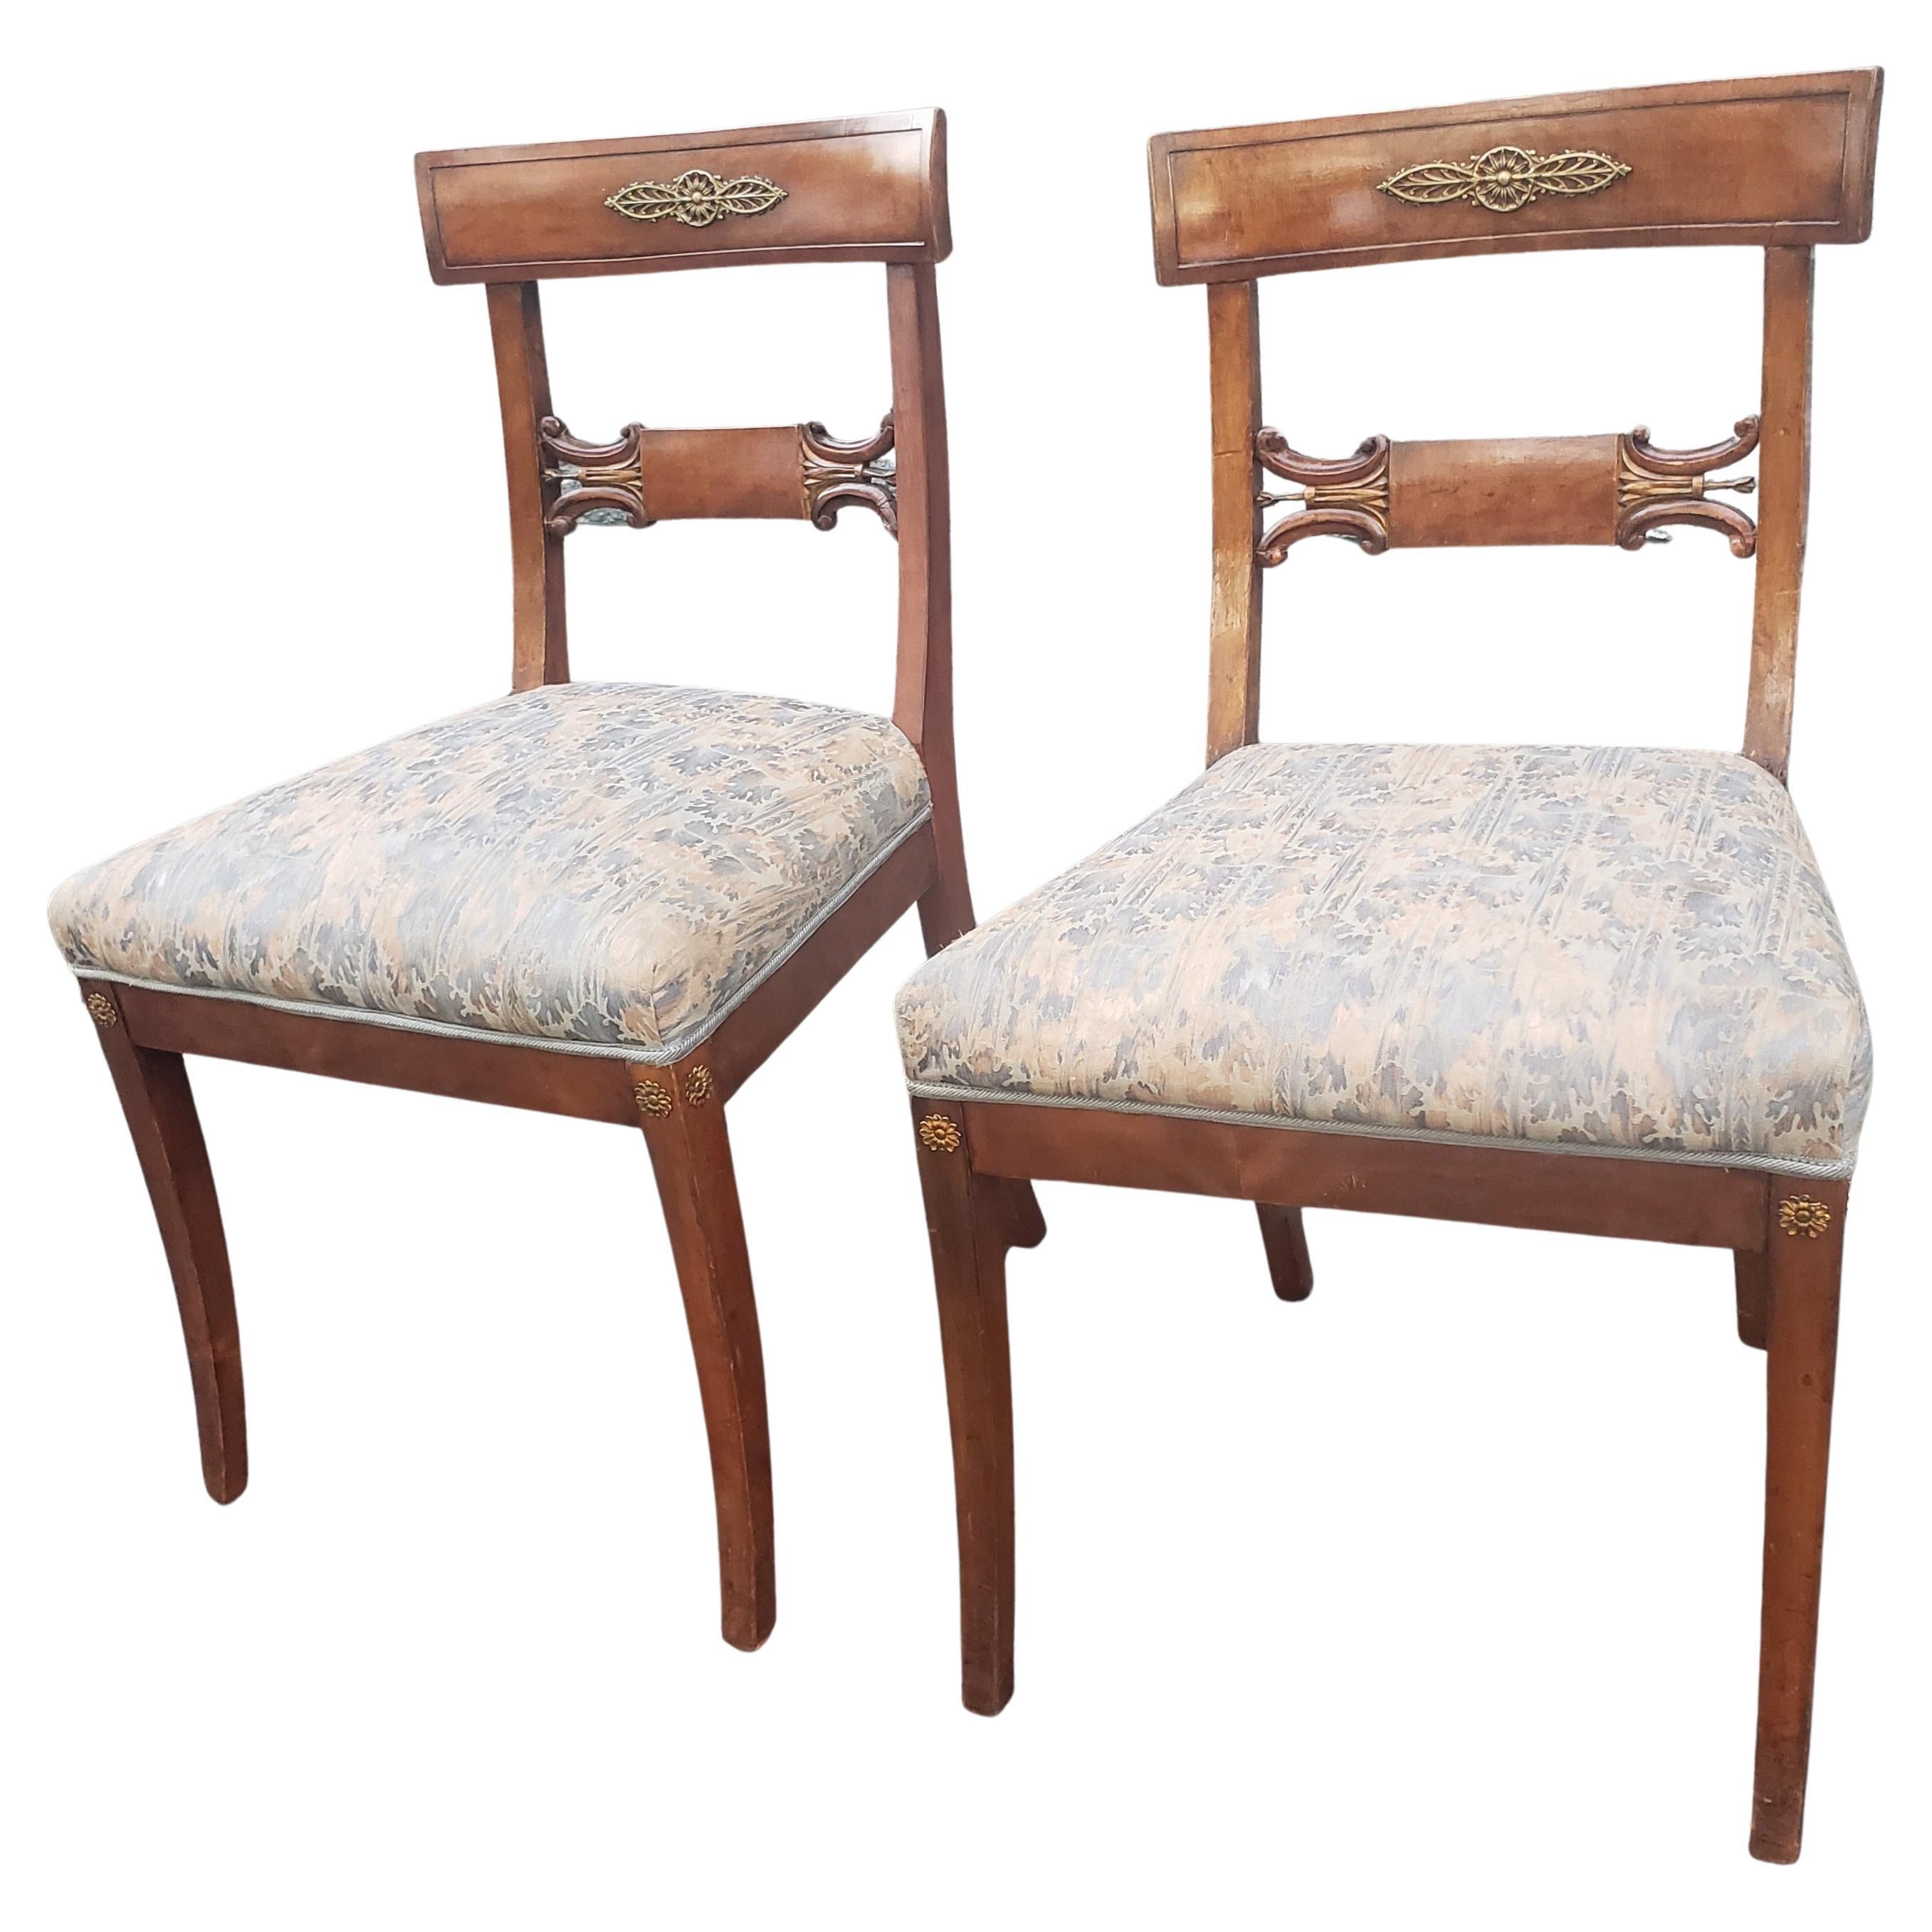 American Empire Pair of 19th C Empire Ormolu Mounted, Partial Gilt Mahogany & Upholstered Chairs For Sale